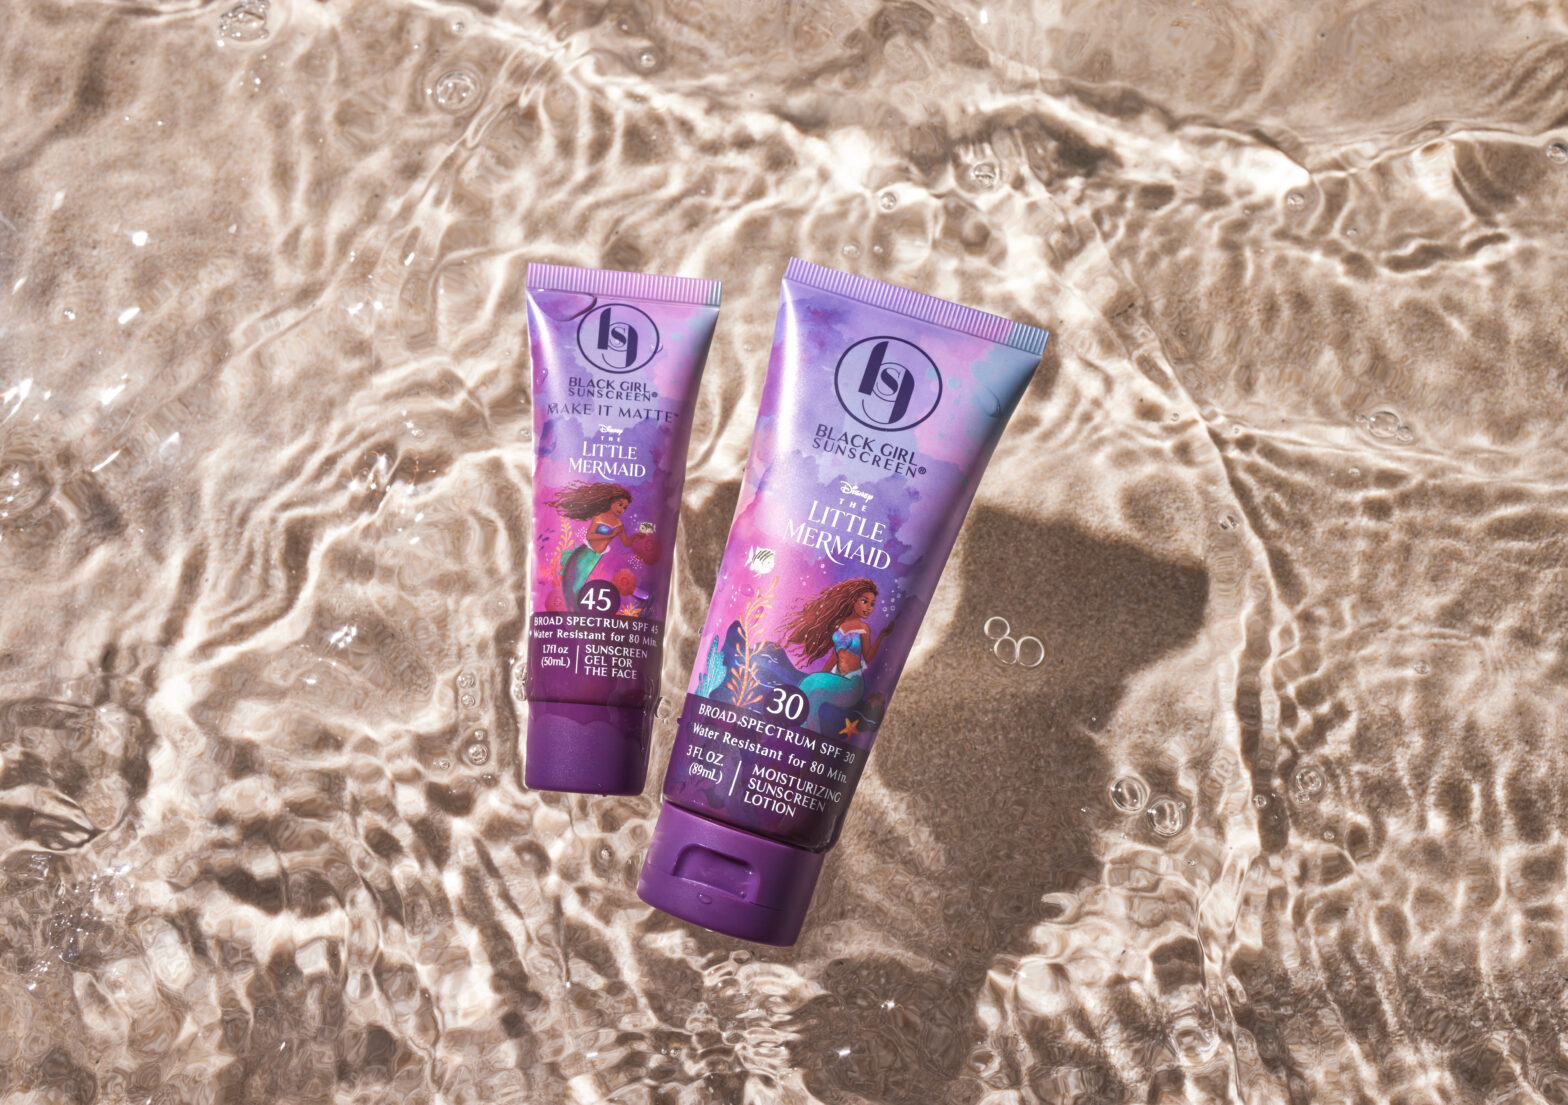 Black Girl Sunscreen and The Little Mermaid Bring Us the Beauty Collab We’ve Been Needing ￼